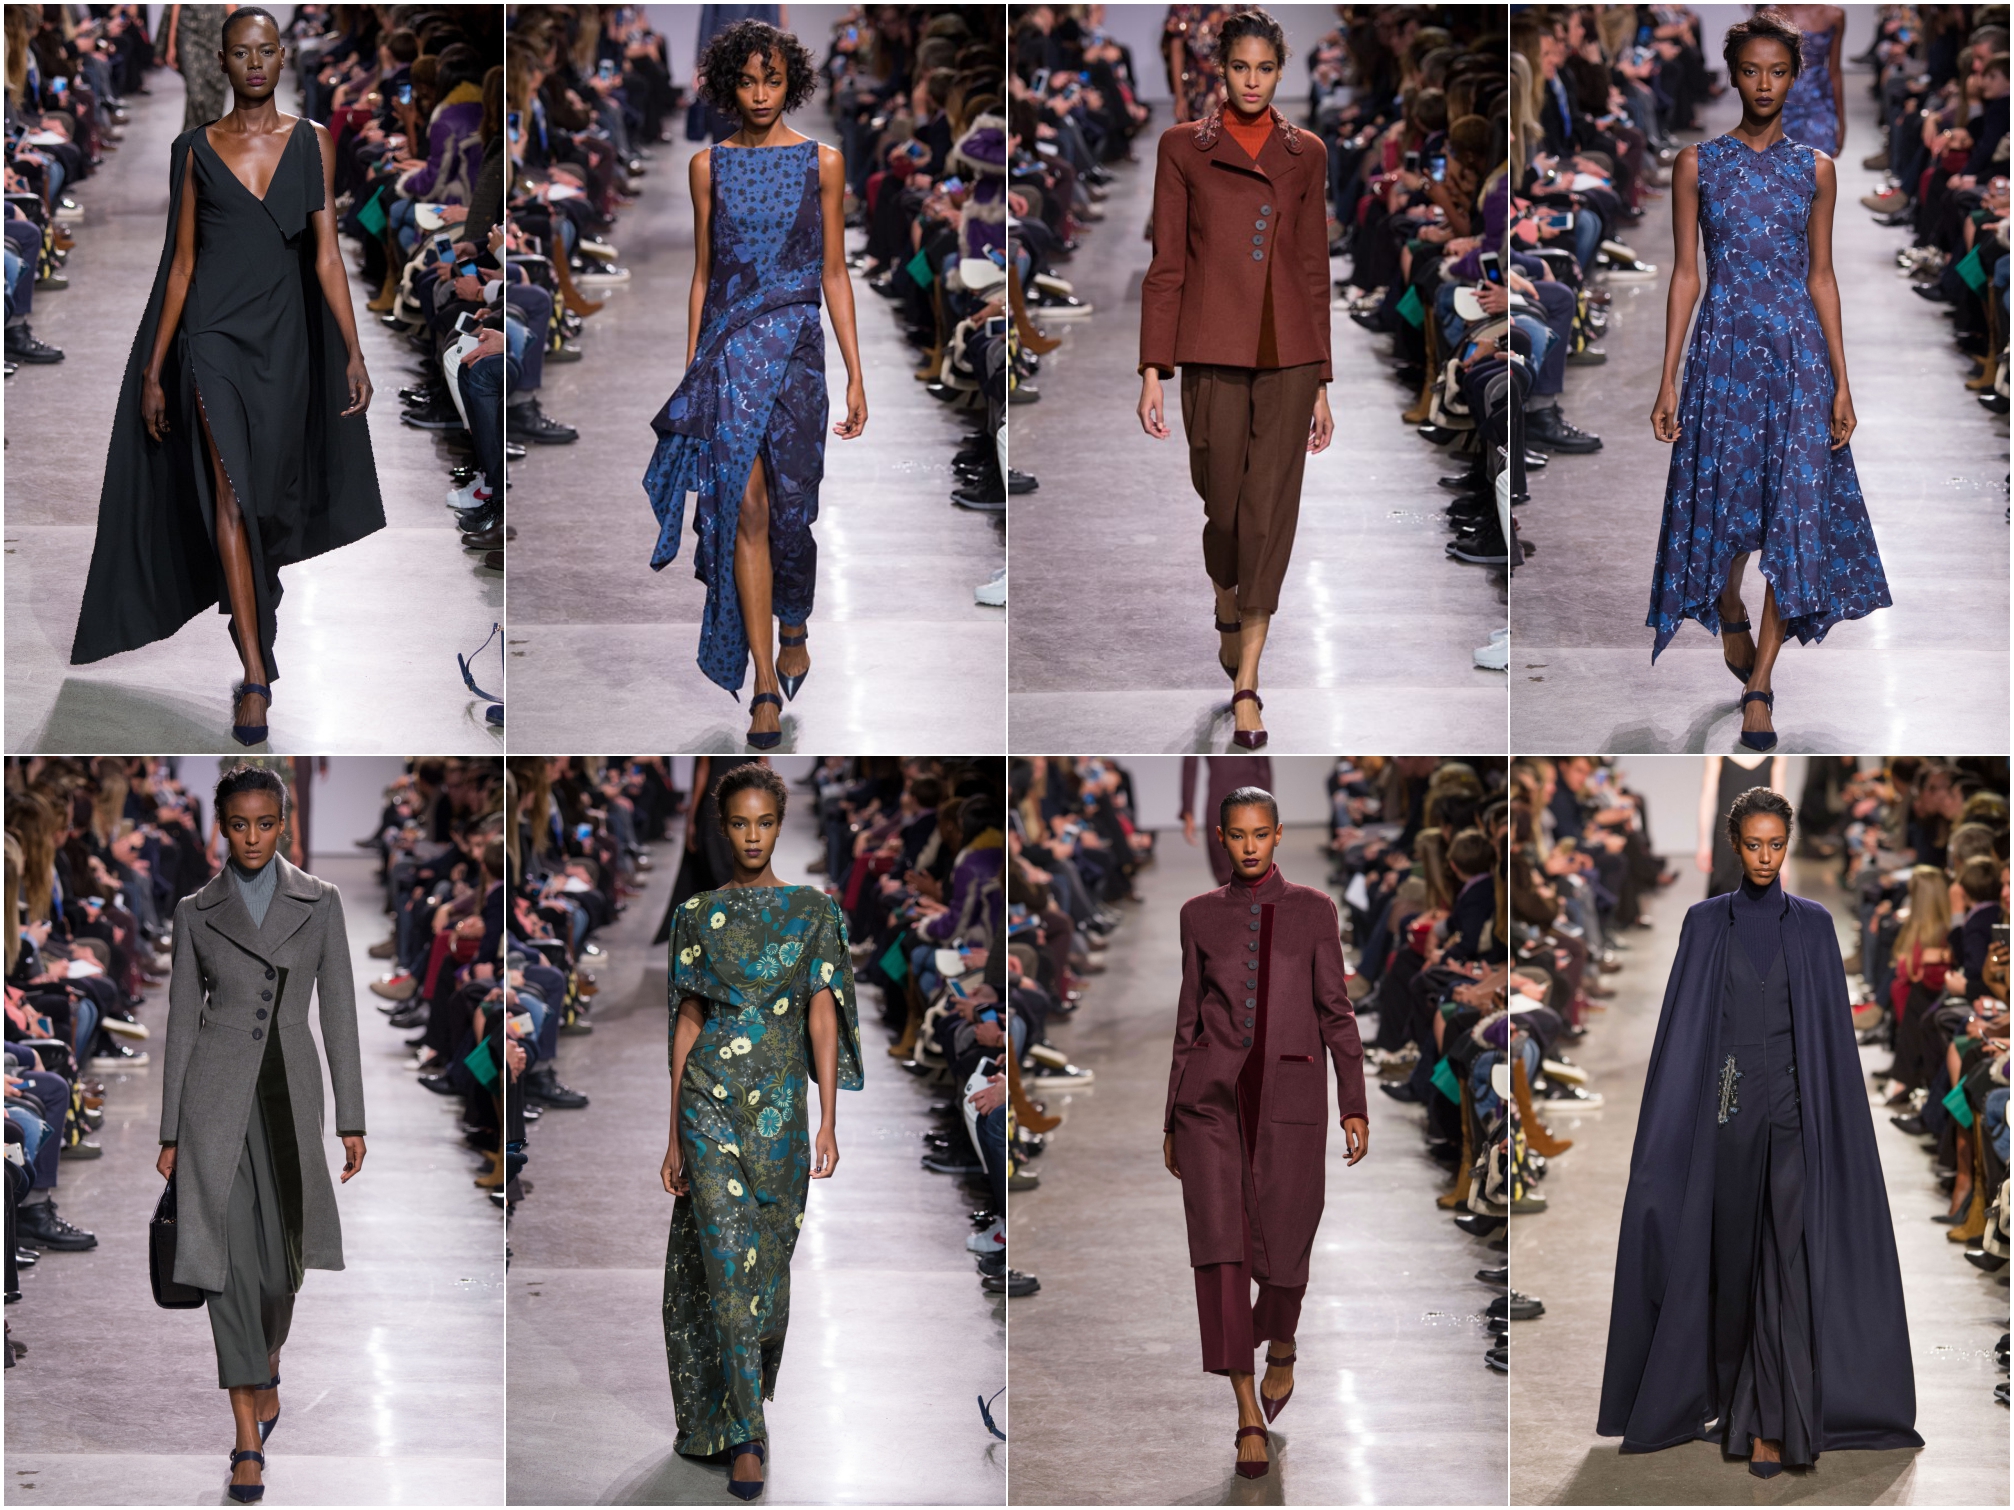 8 of the 25 black models who walked for Zac Posen's collection at NYFW 2016